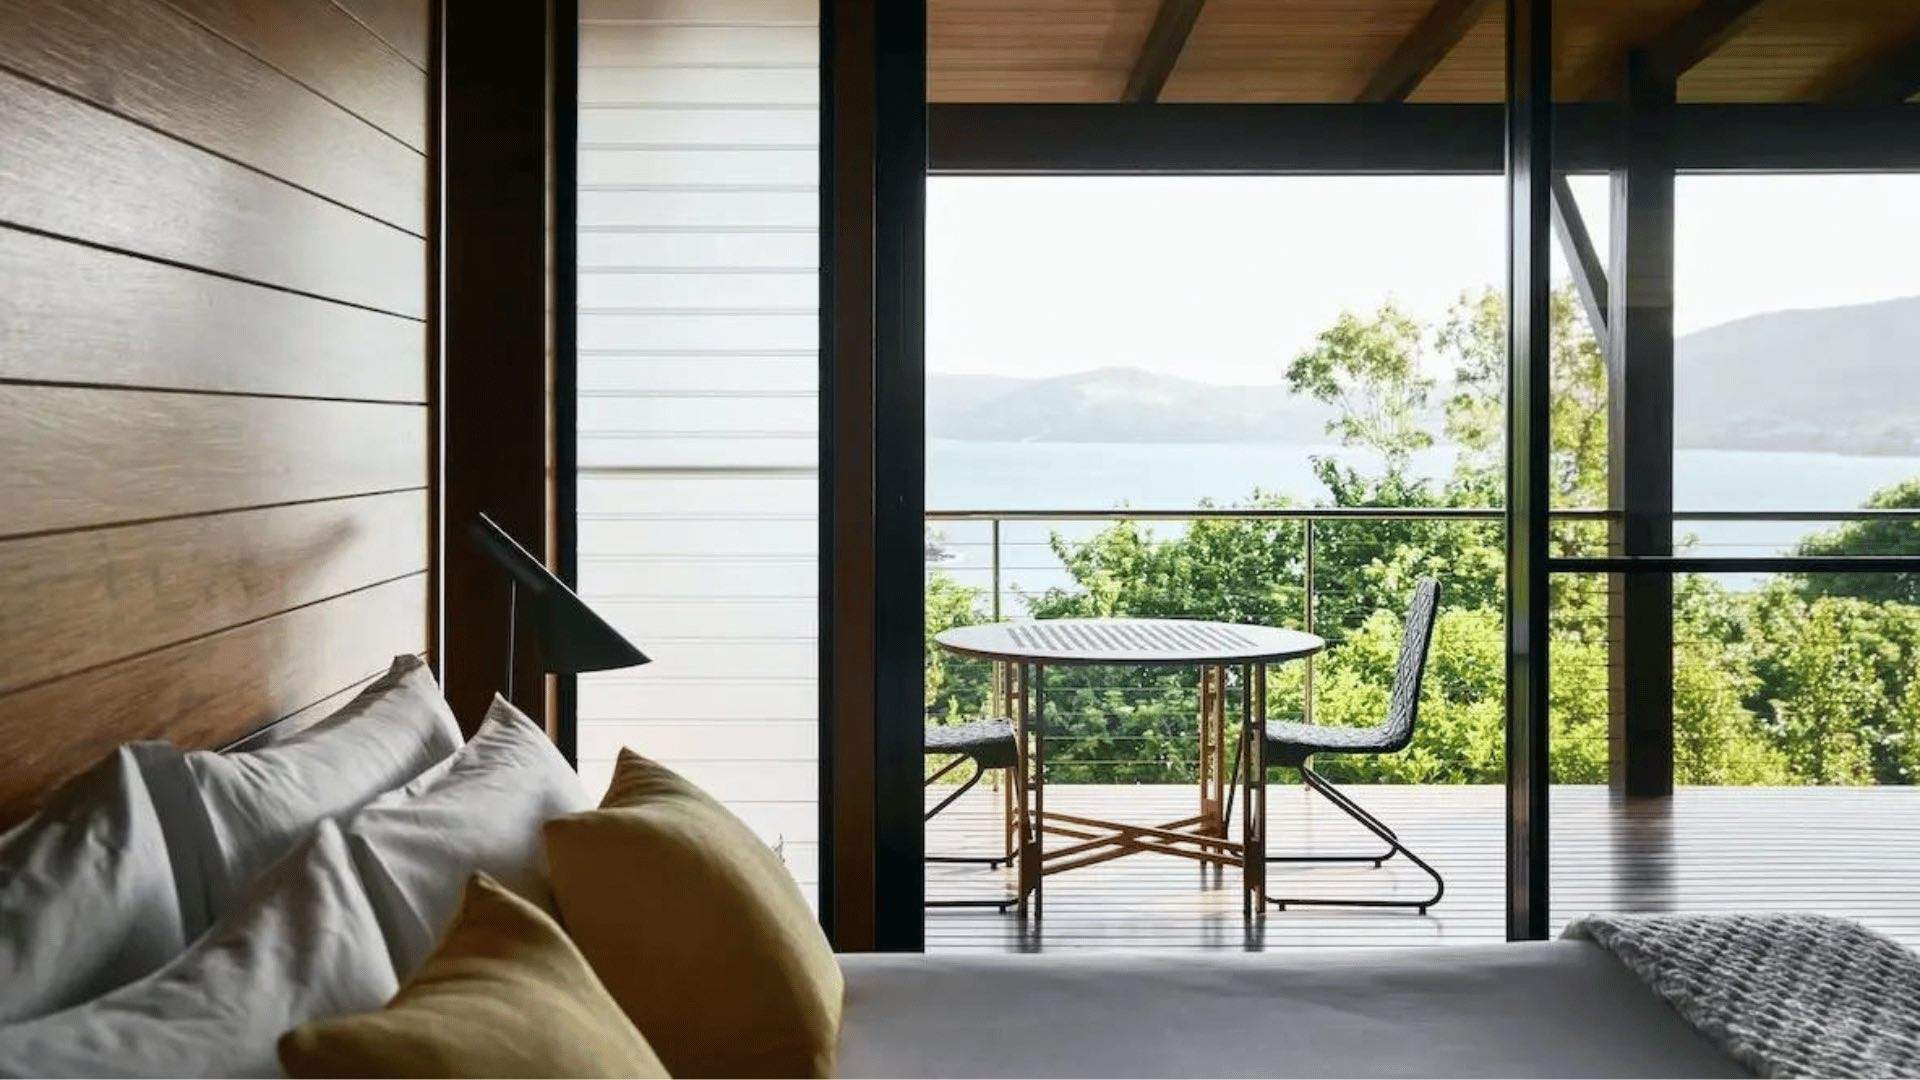 A king bed and terrace overlooking the ocean at qualia resort on Hamilton Island.